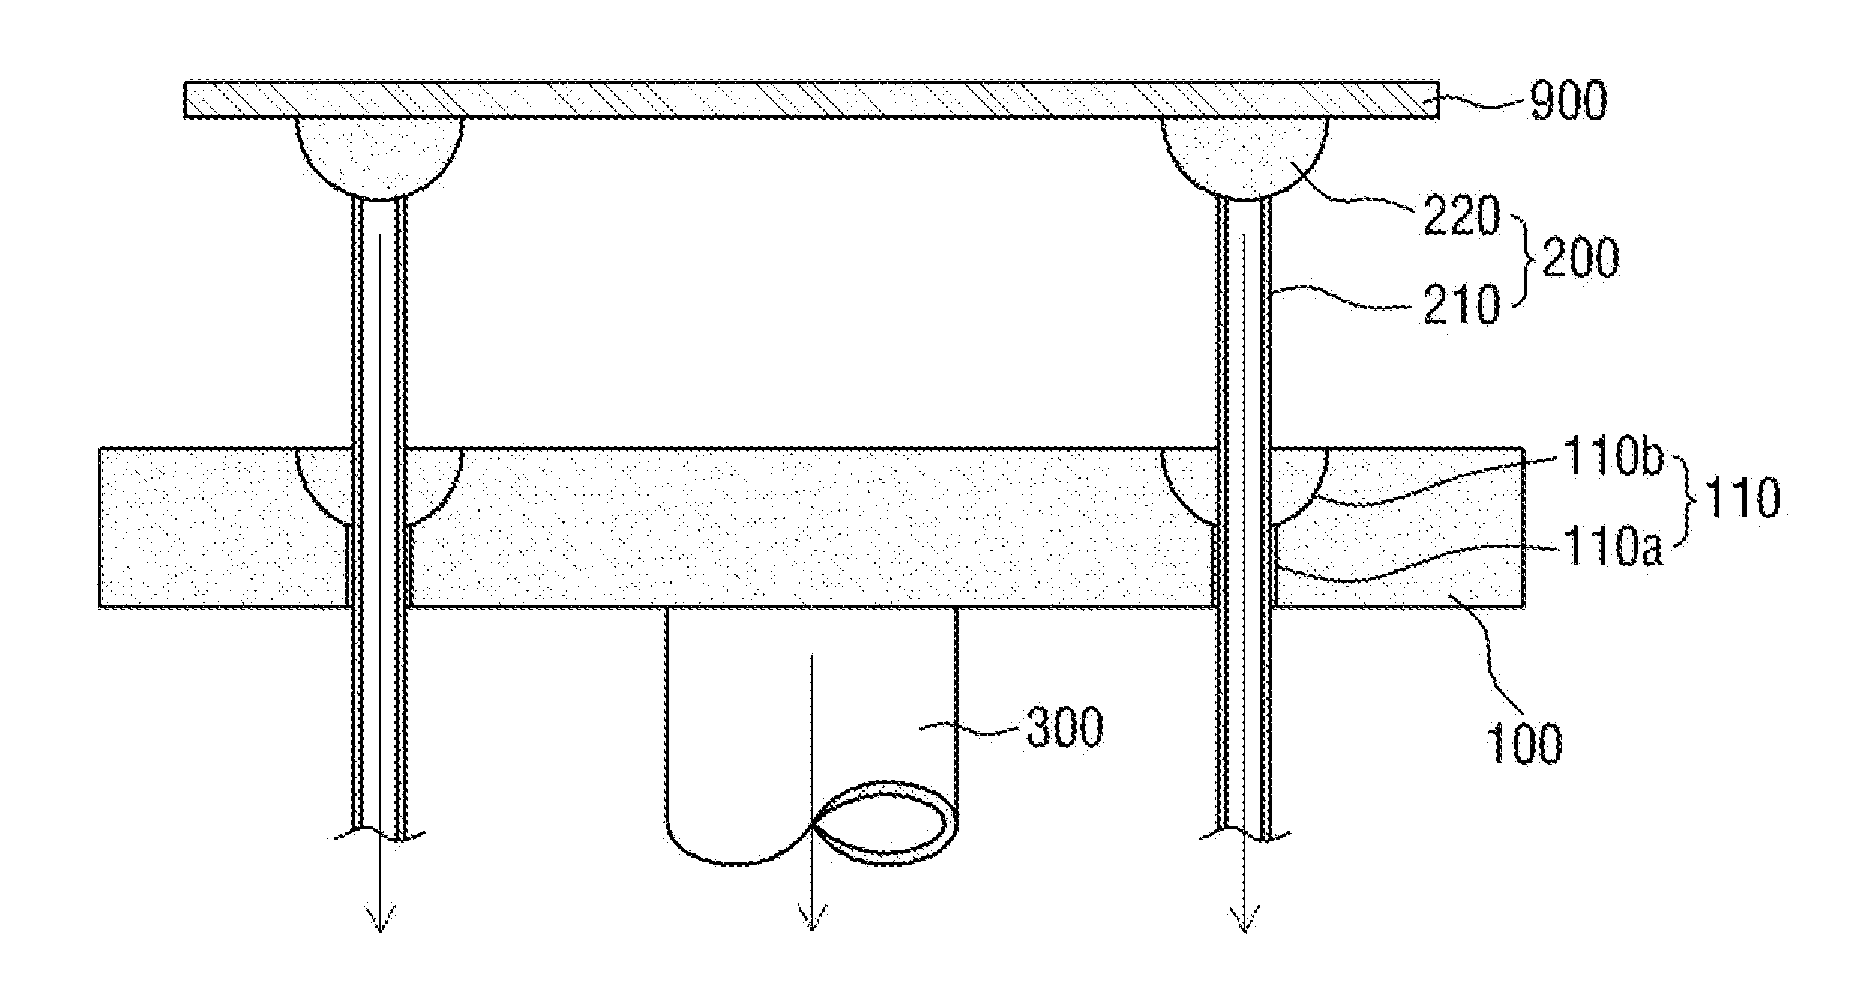 Substrate holding apparatus and method